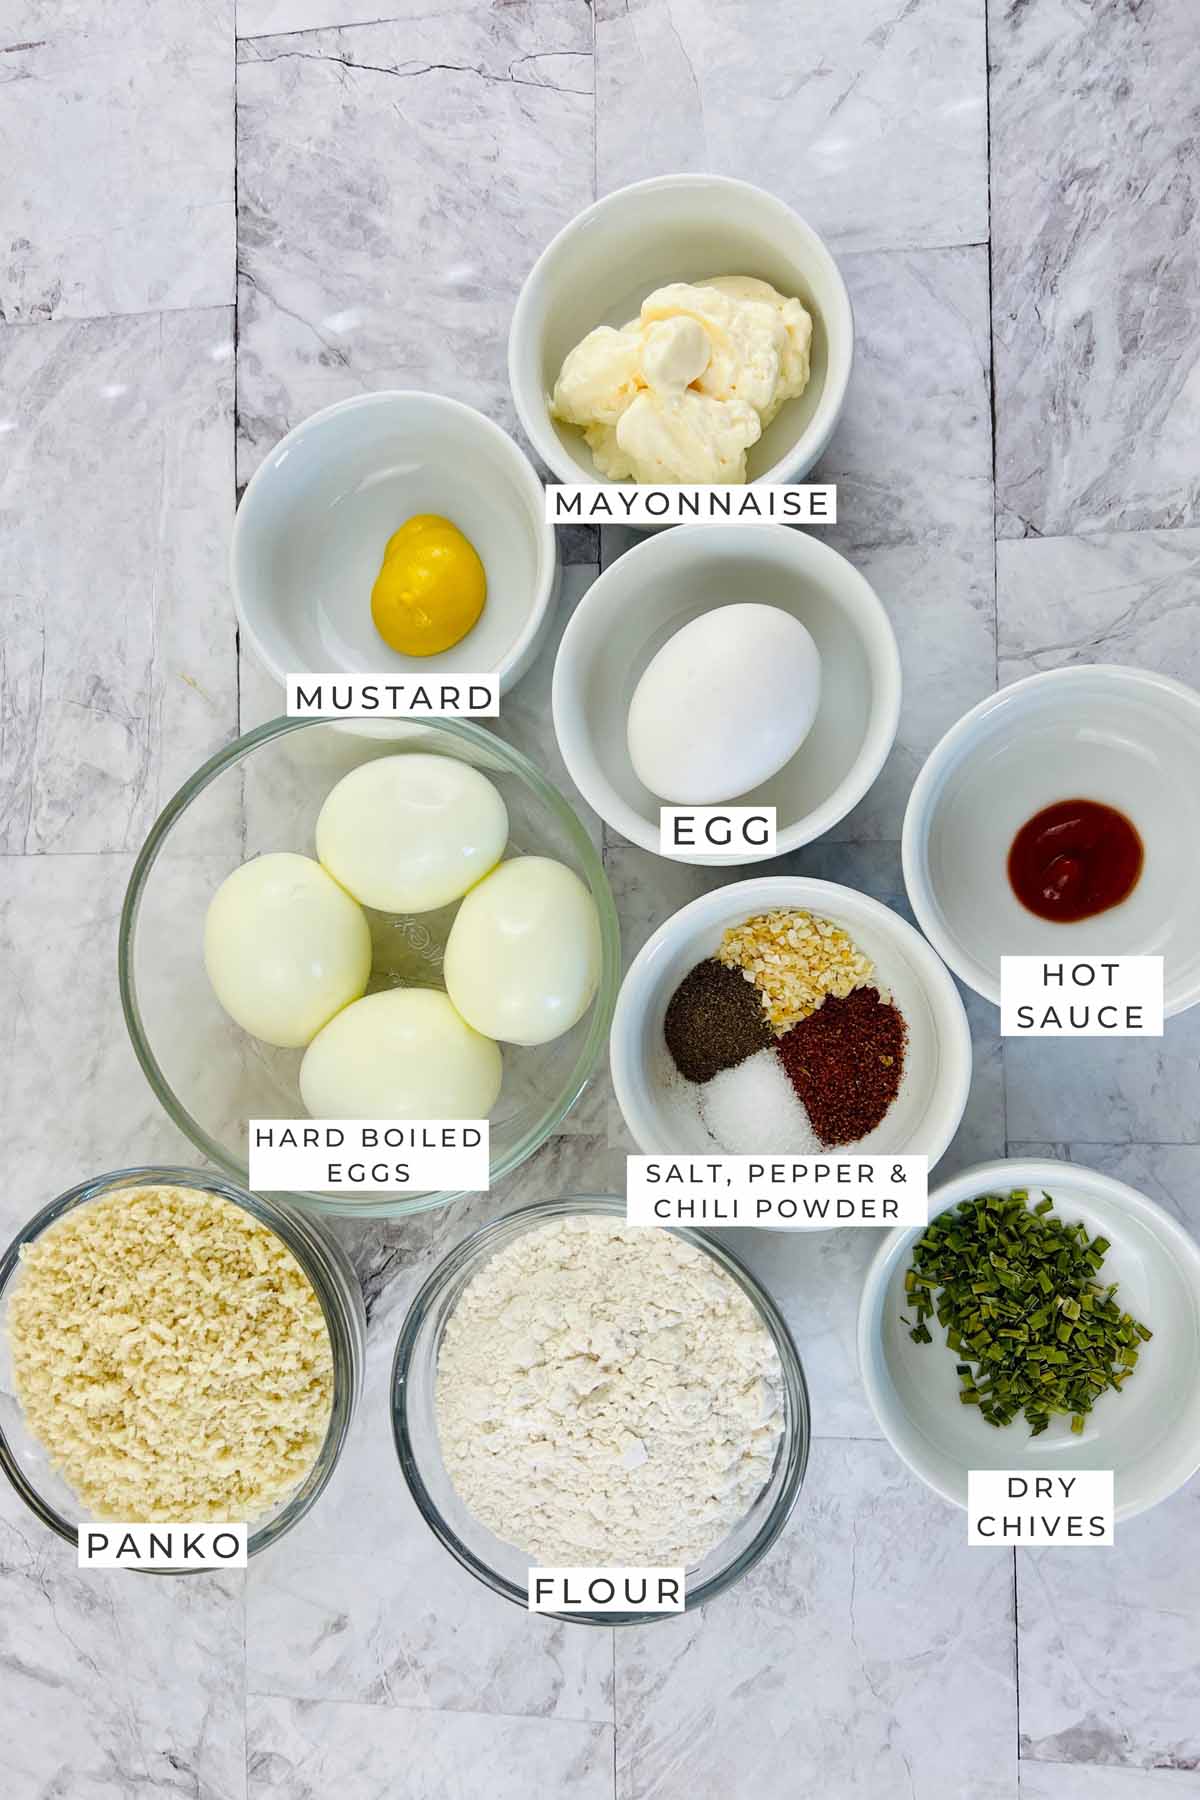 Labeled ingredients for the deviled eggs.